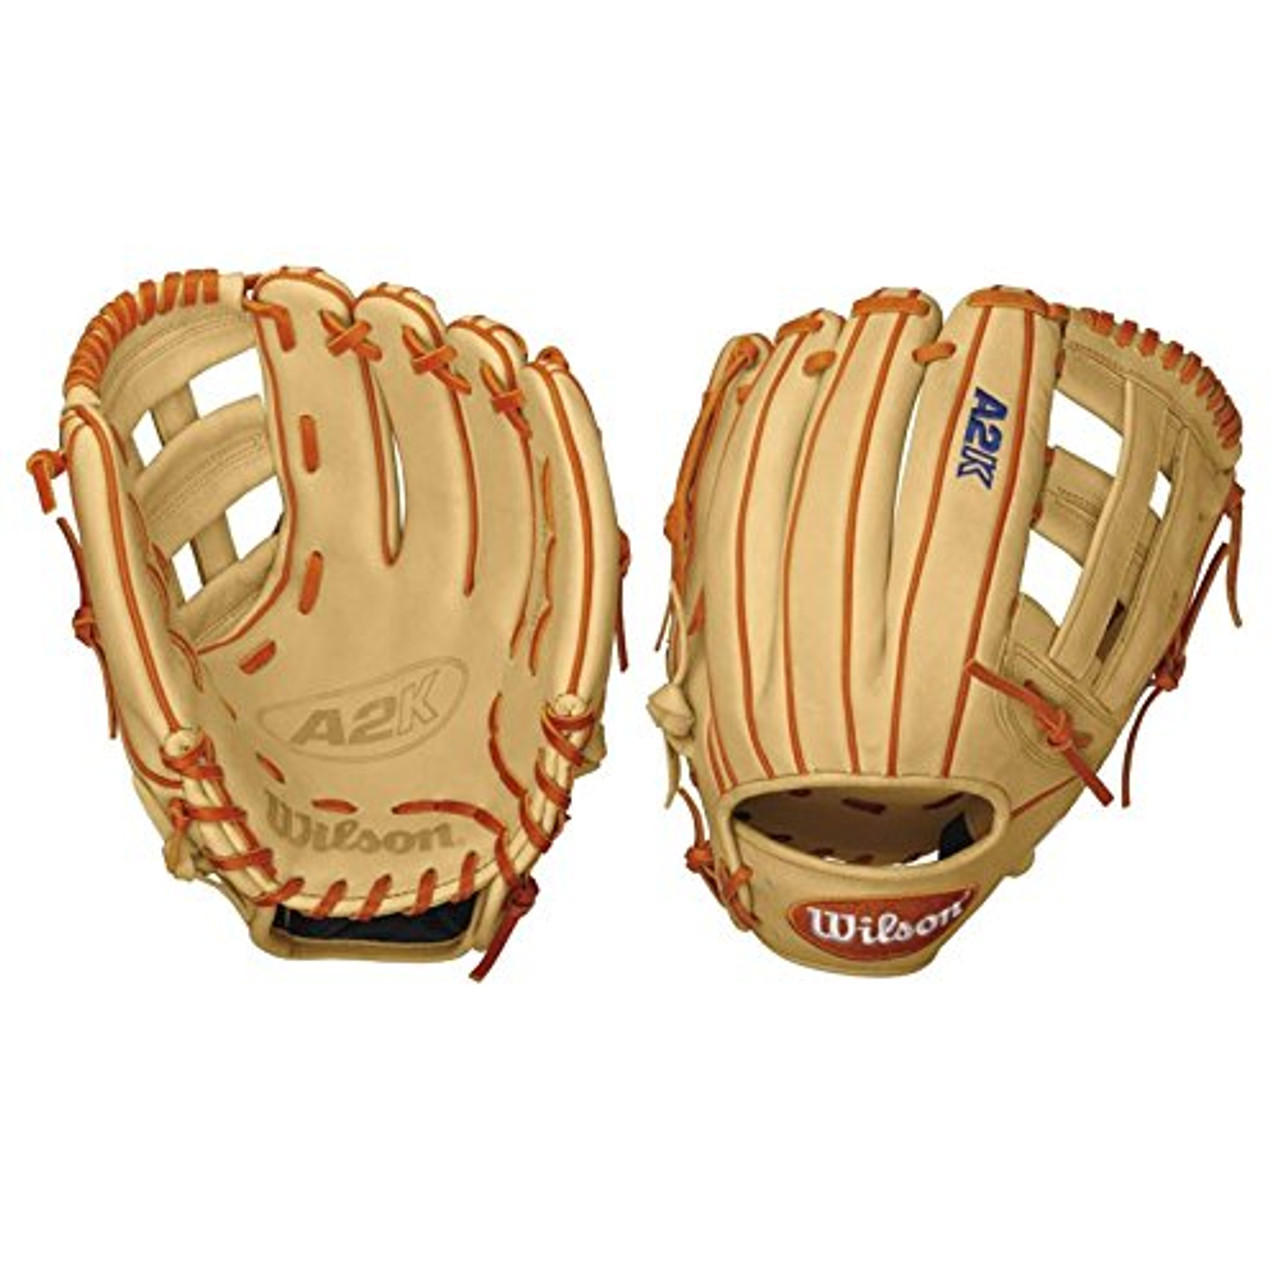 David Wright New York Mets Fanatics Authentic Autographed Wilson Game Model  Glove